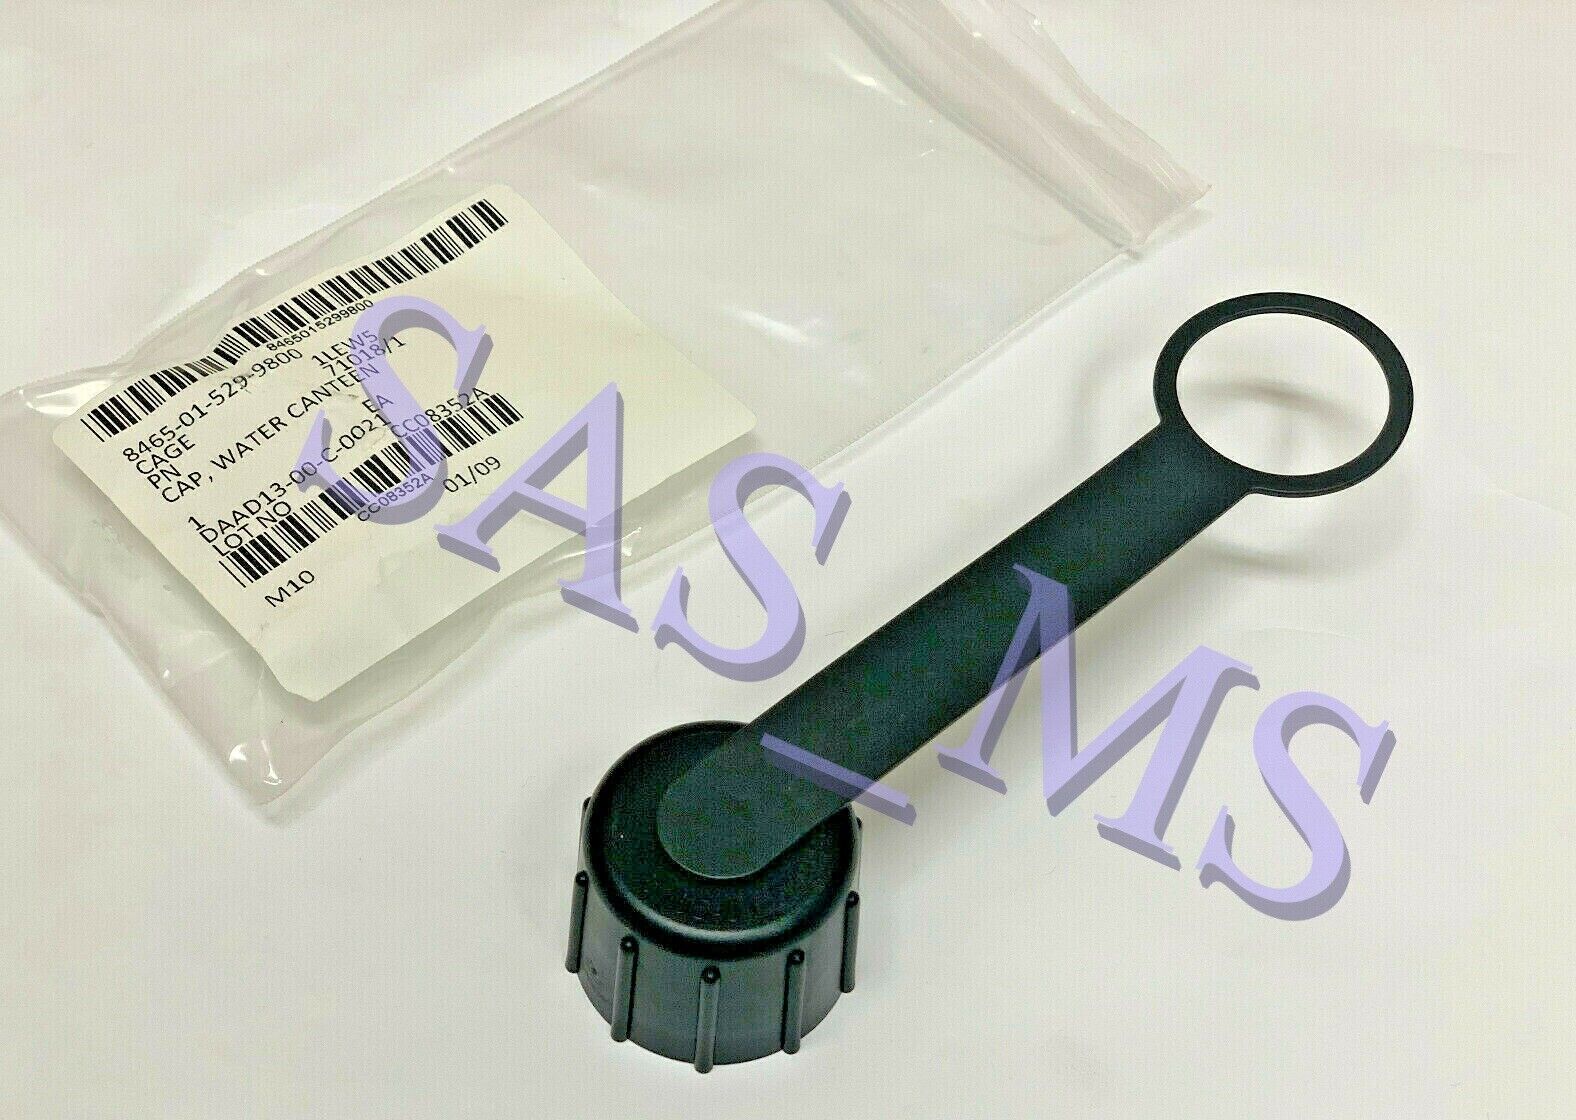 US ARMY ISSUED 1&2 QUART CANTEEN CAP/LID FOR AVON M50 GAS MASK 8465-01-529-9800